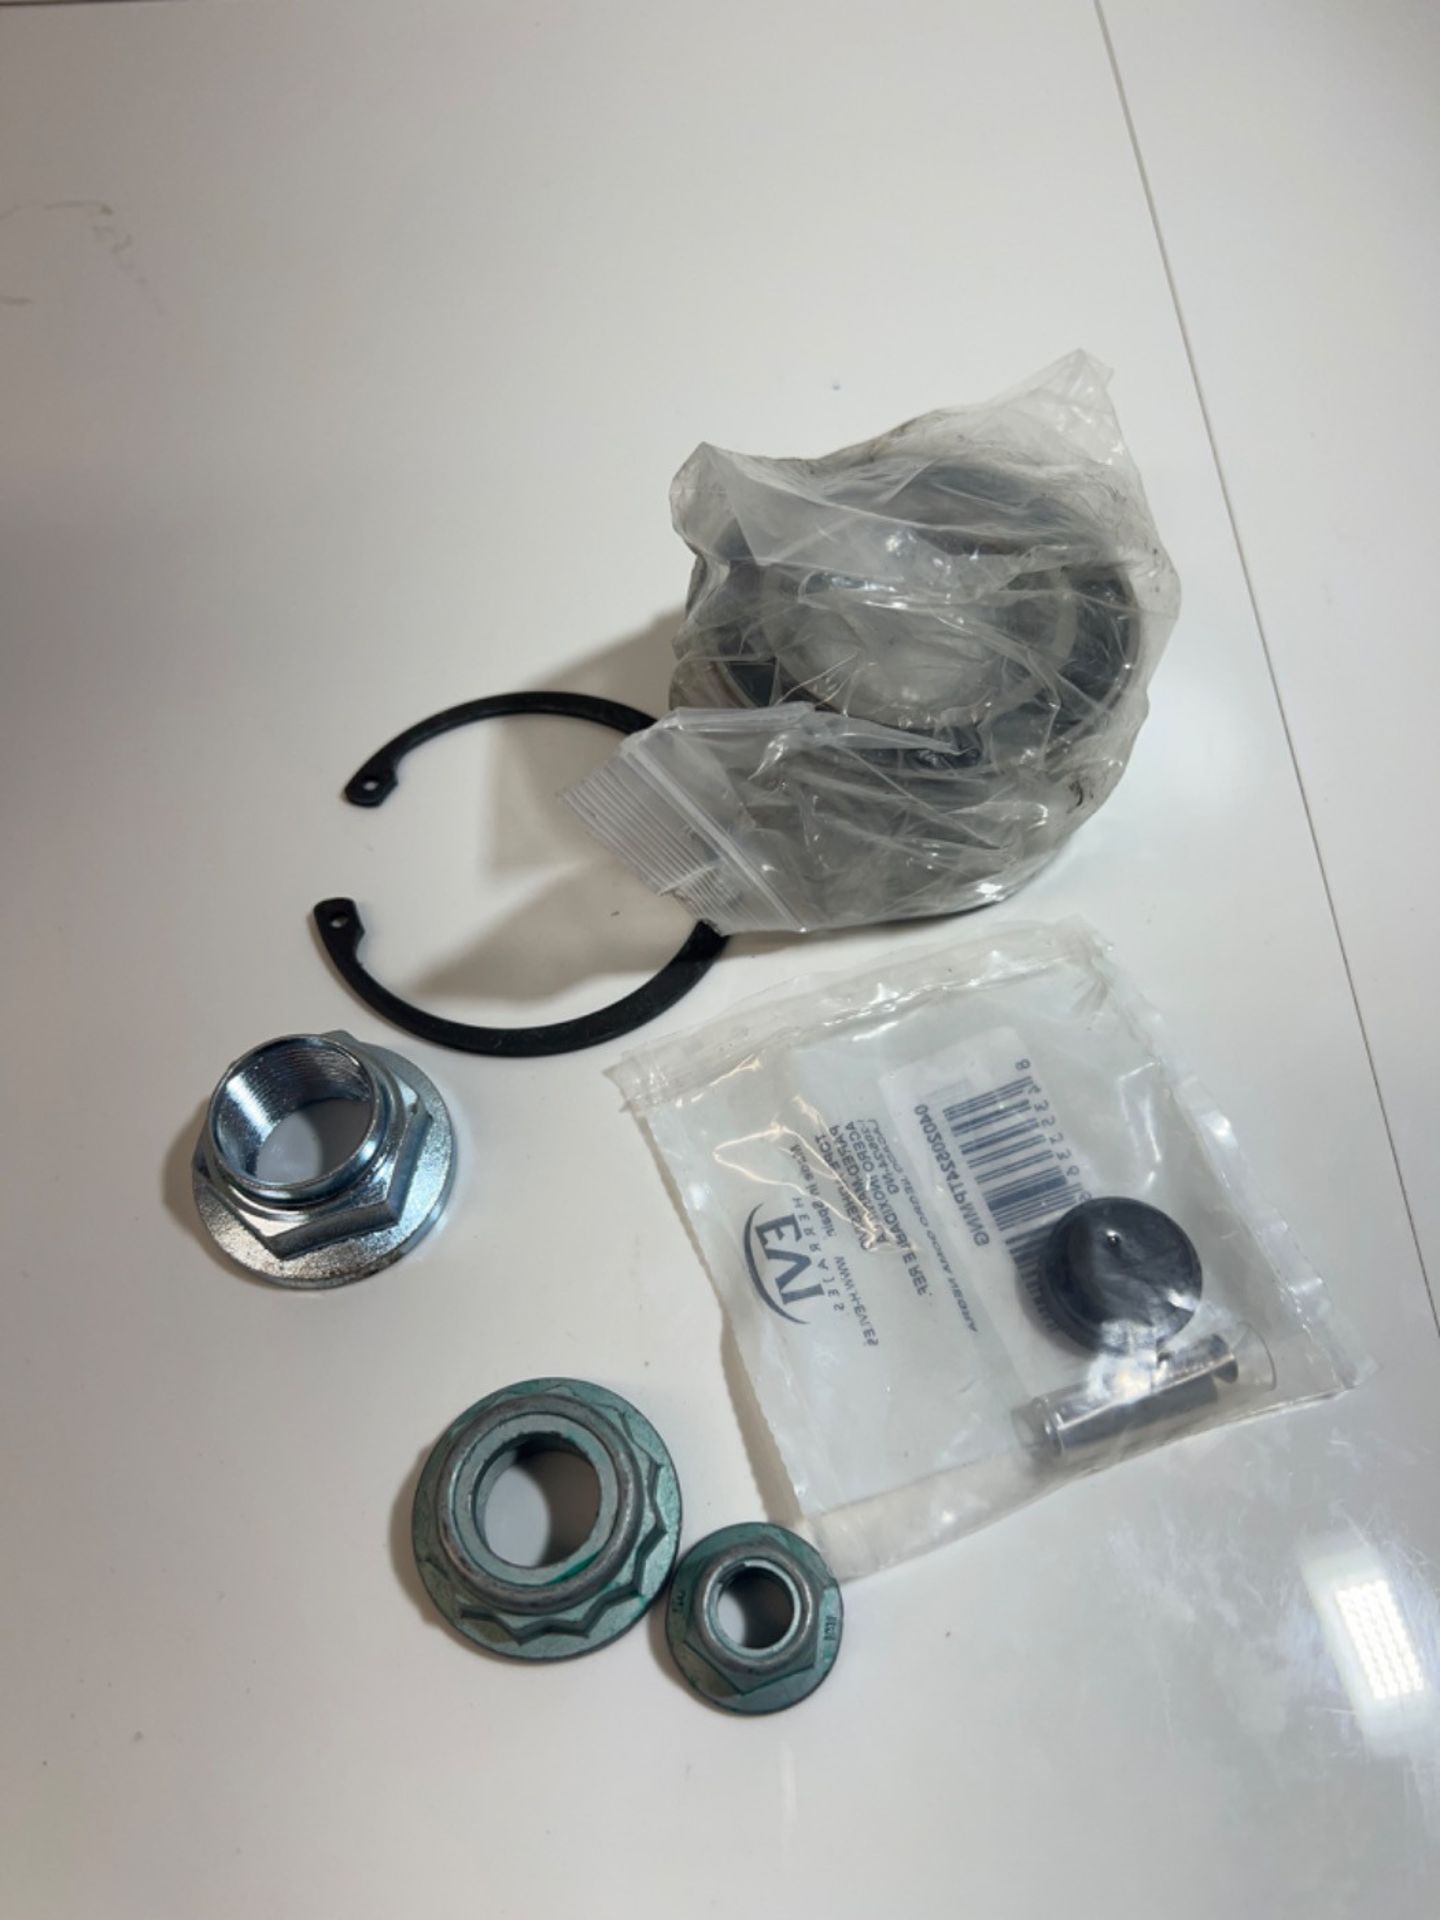 febi bilstein 14250 Wheel Bearing Kit with axle nut, nuts and circlip, pack of one - Image 2 of 3